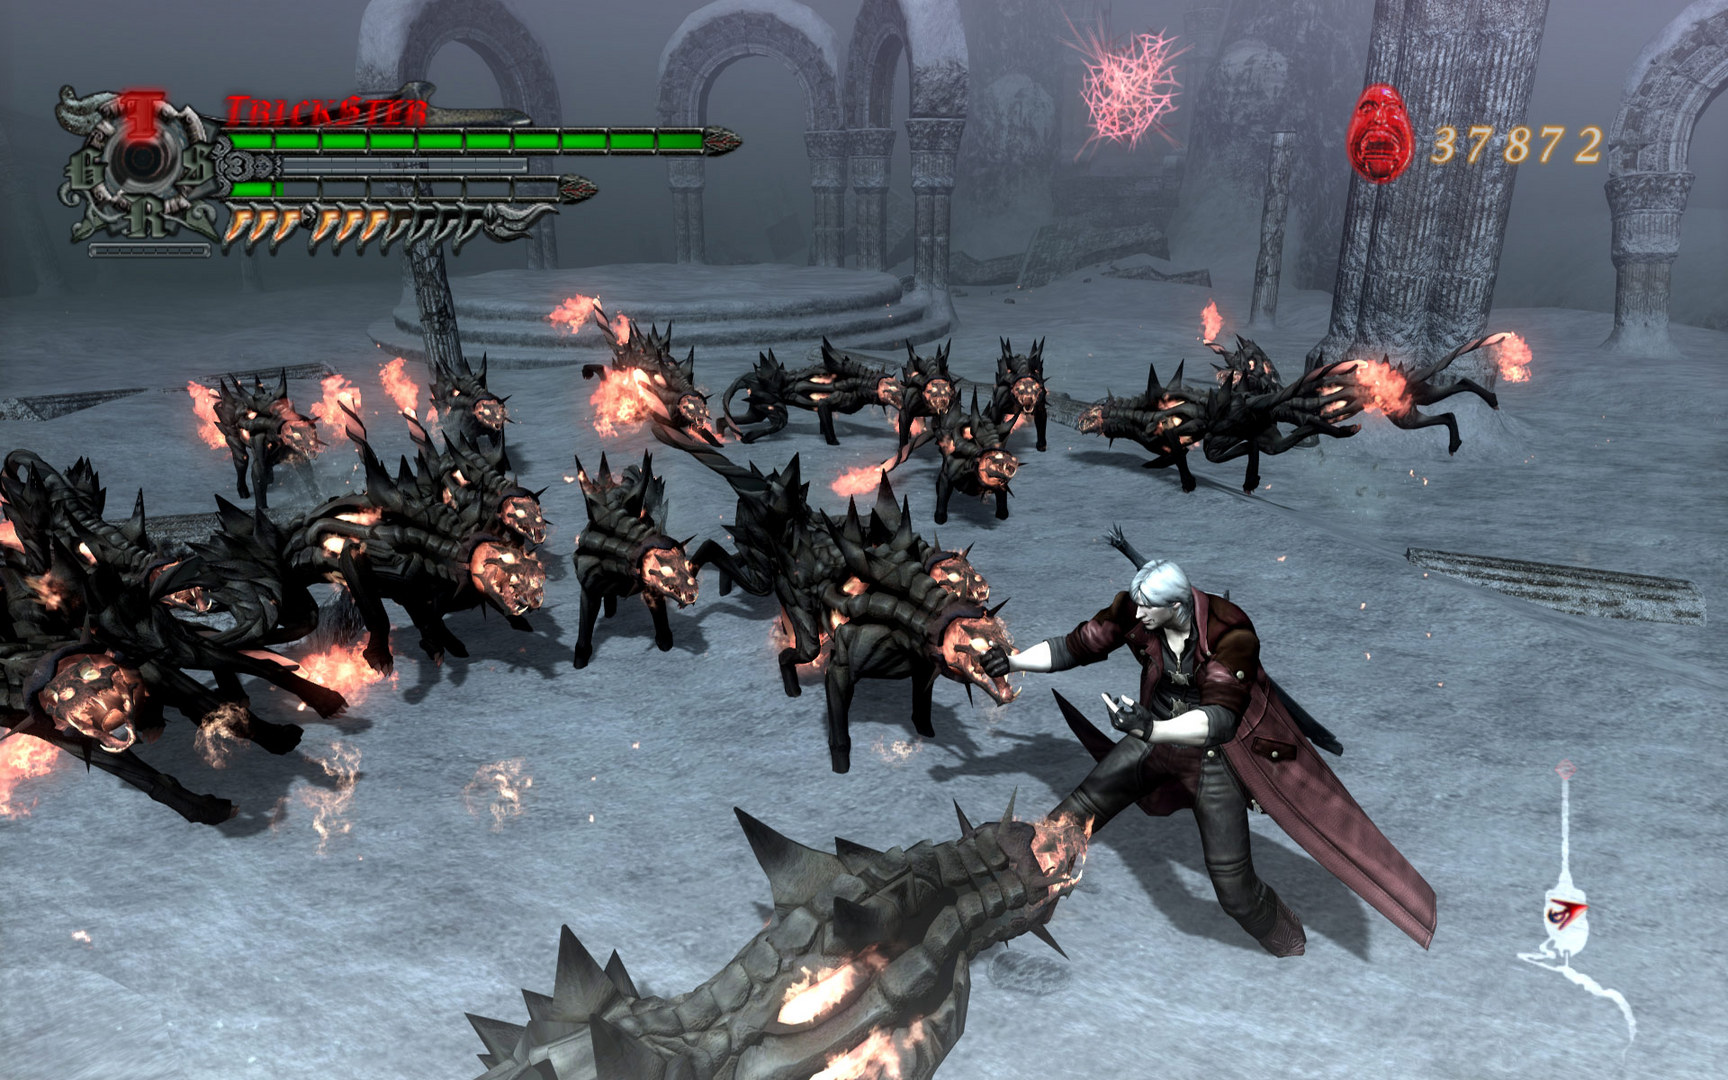 devil may cry 4 special edition pc download